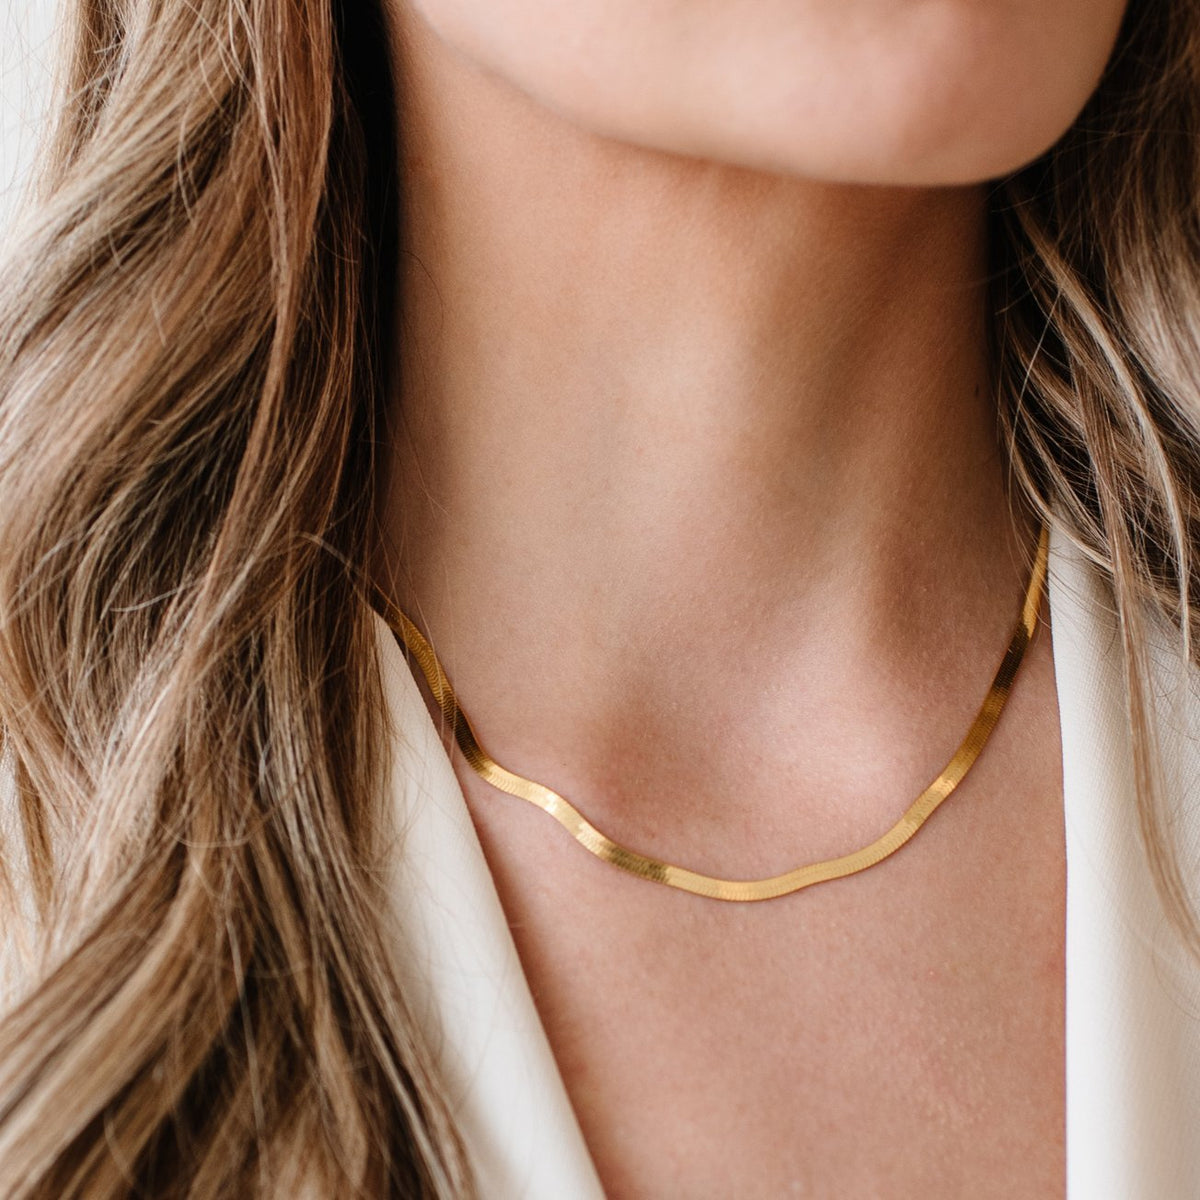 CHARMING HERRINGBONE CHAIN 14-16.5 &quot; NECKLACE GOLD - SO PRETTY CARA COTTER